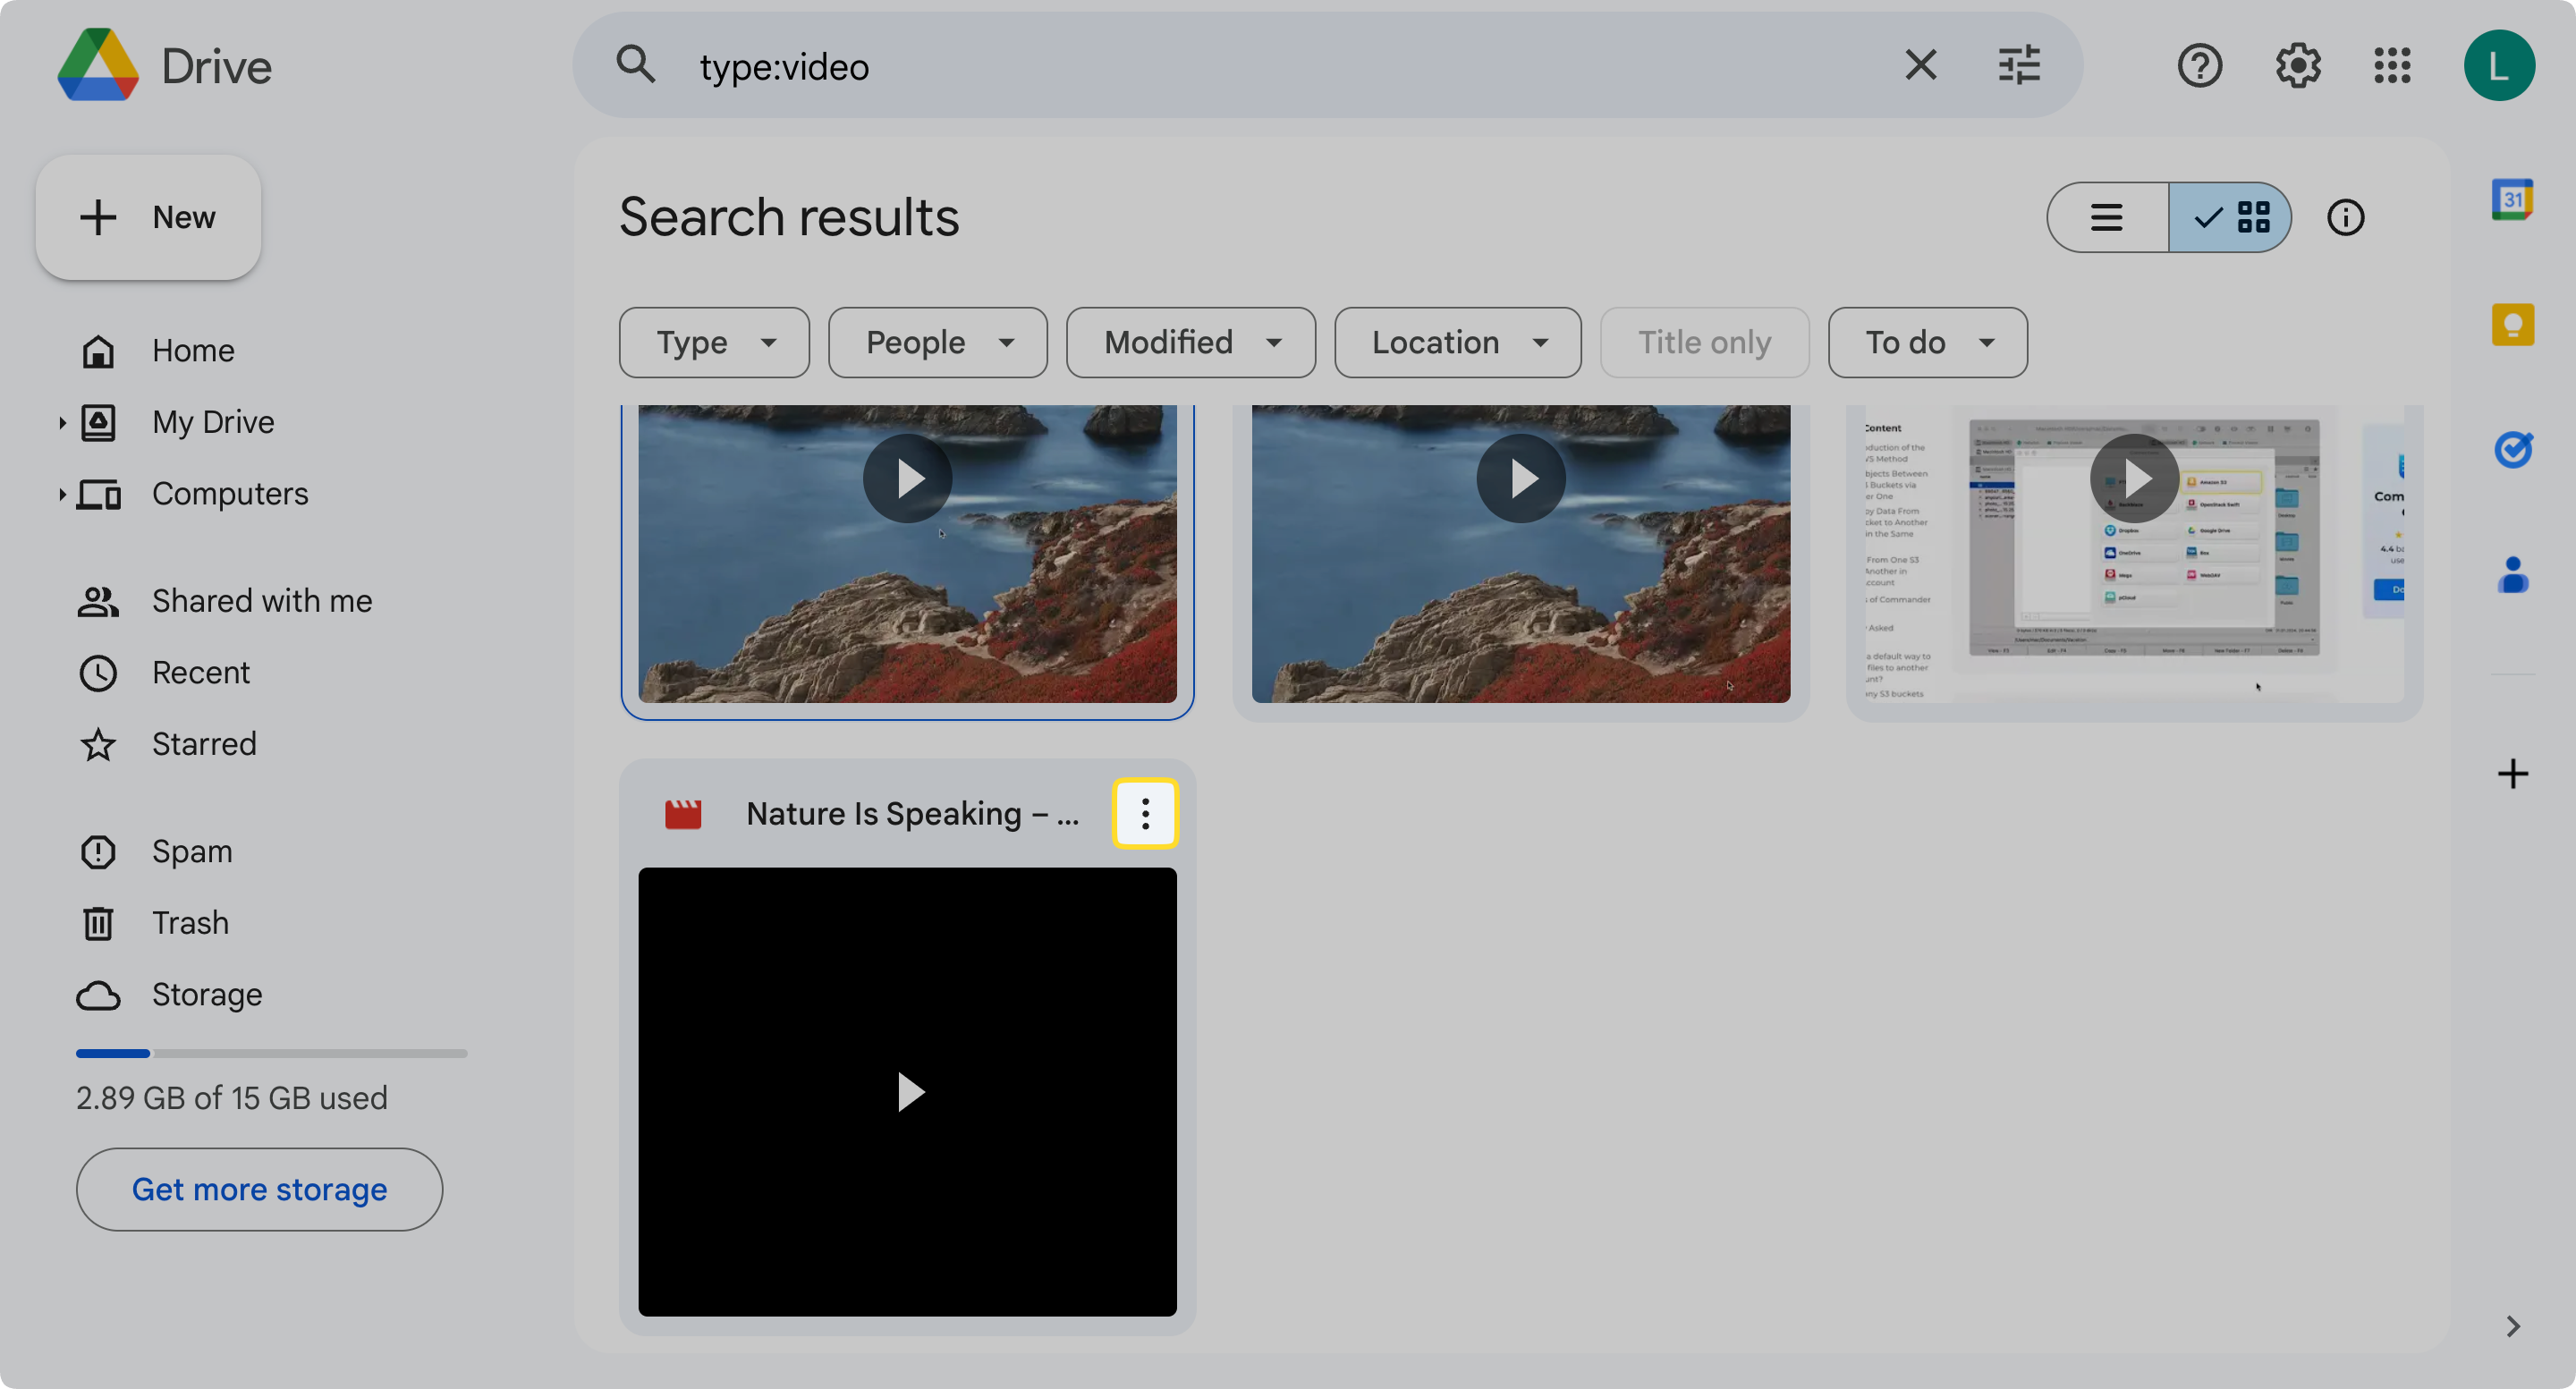 There are video files uplaoded to the Google Drive are demonstrated.